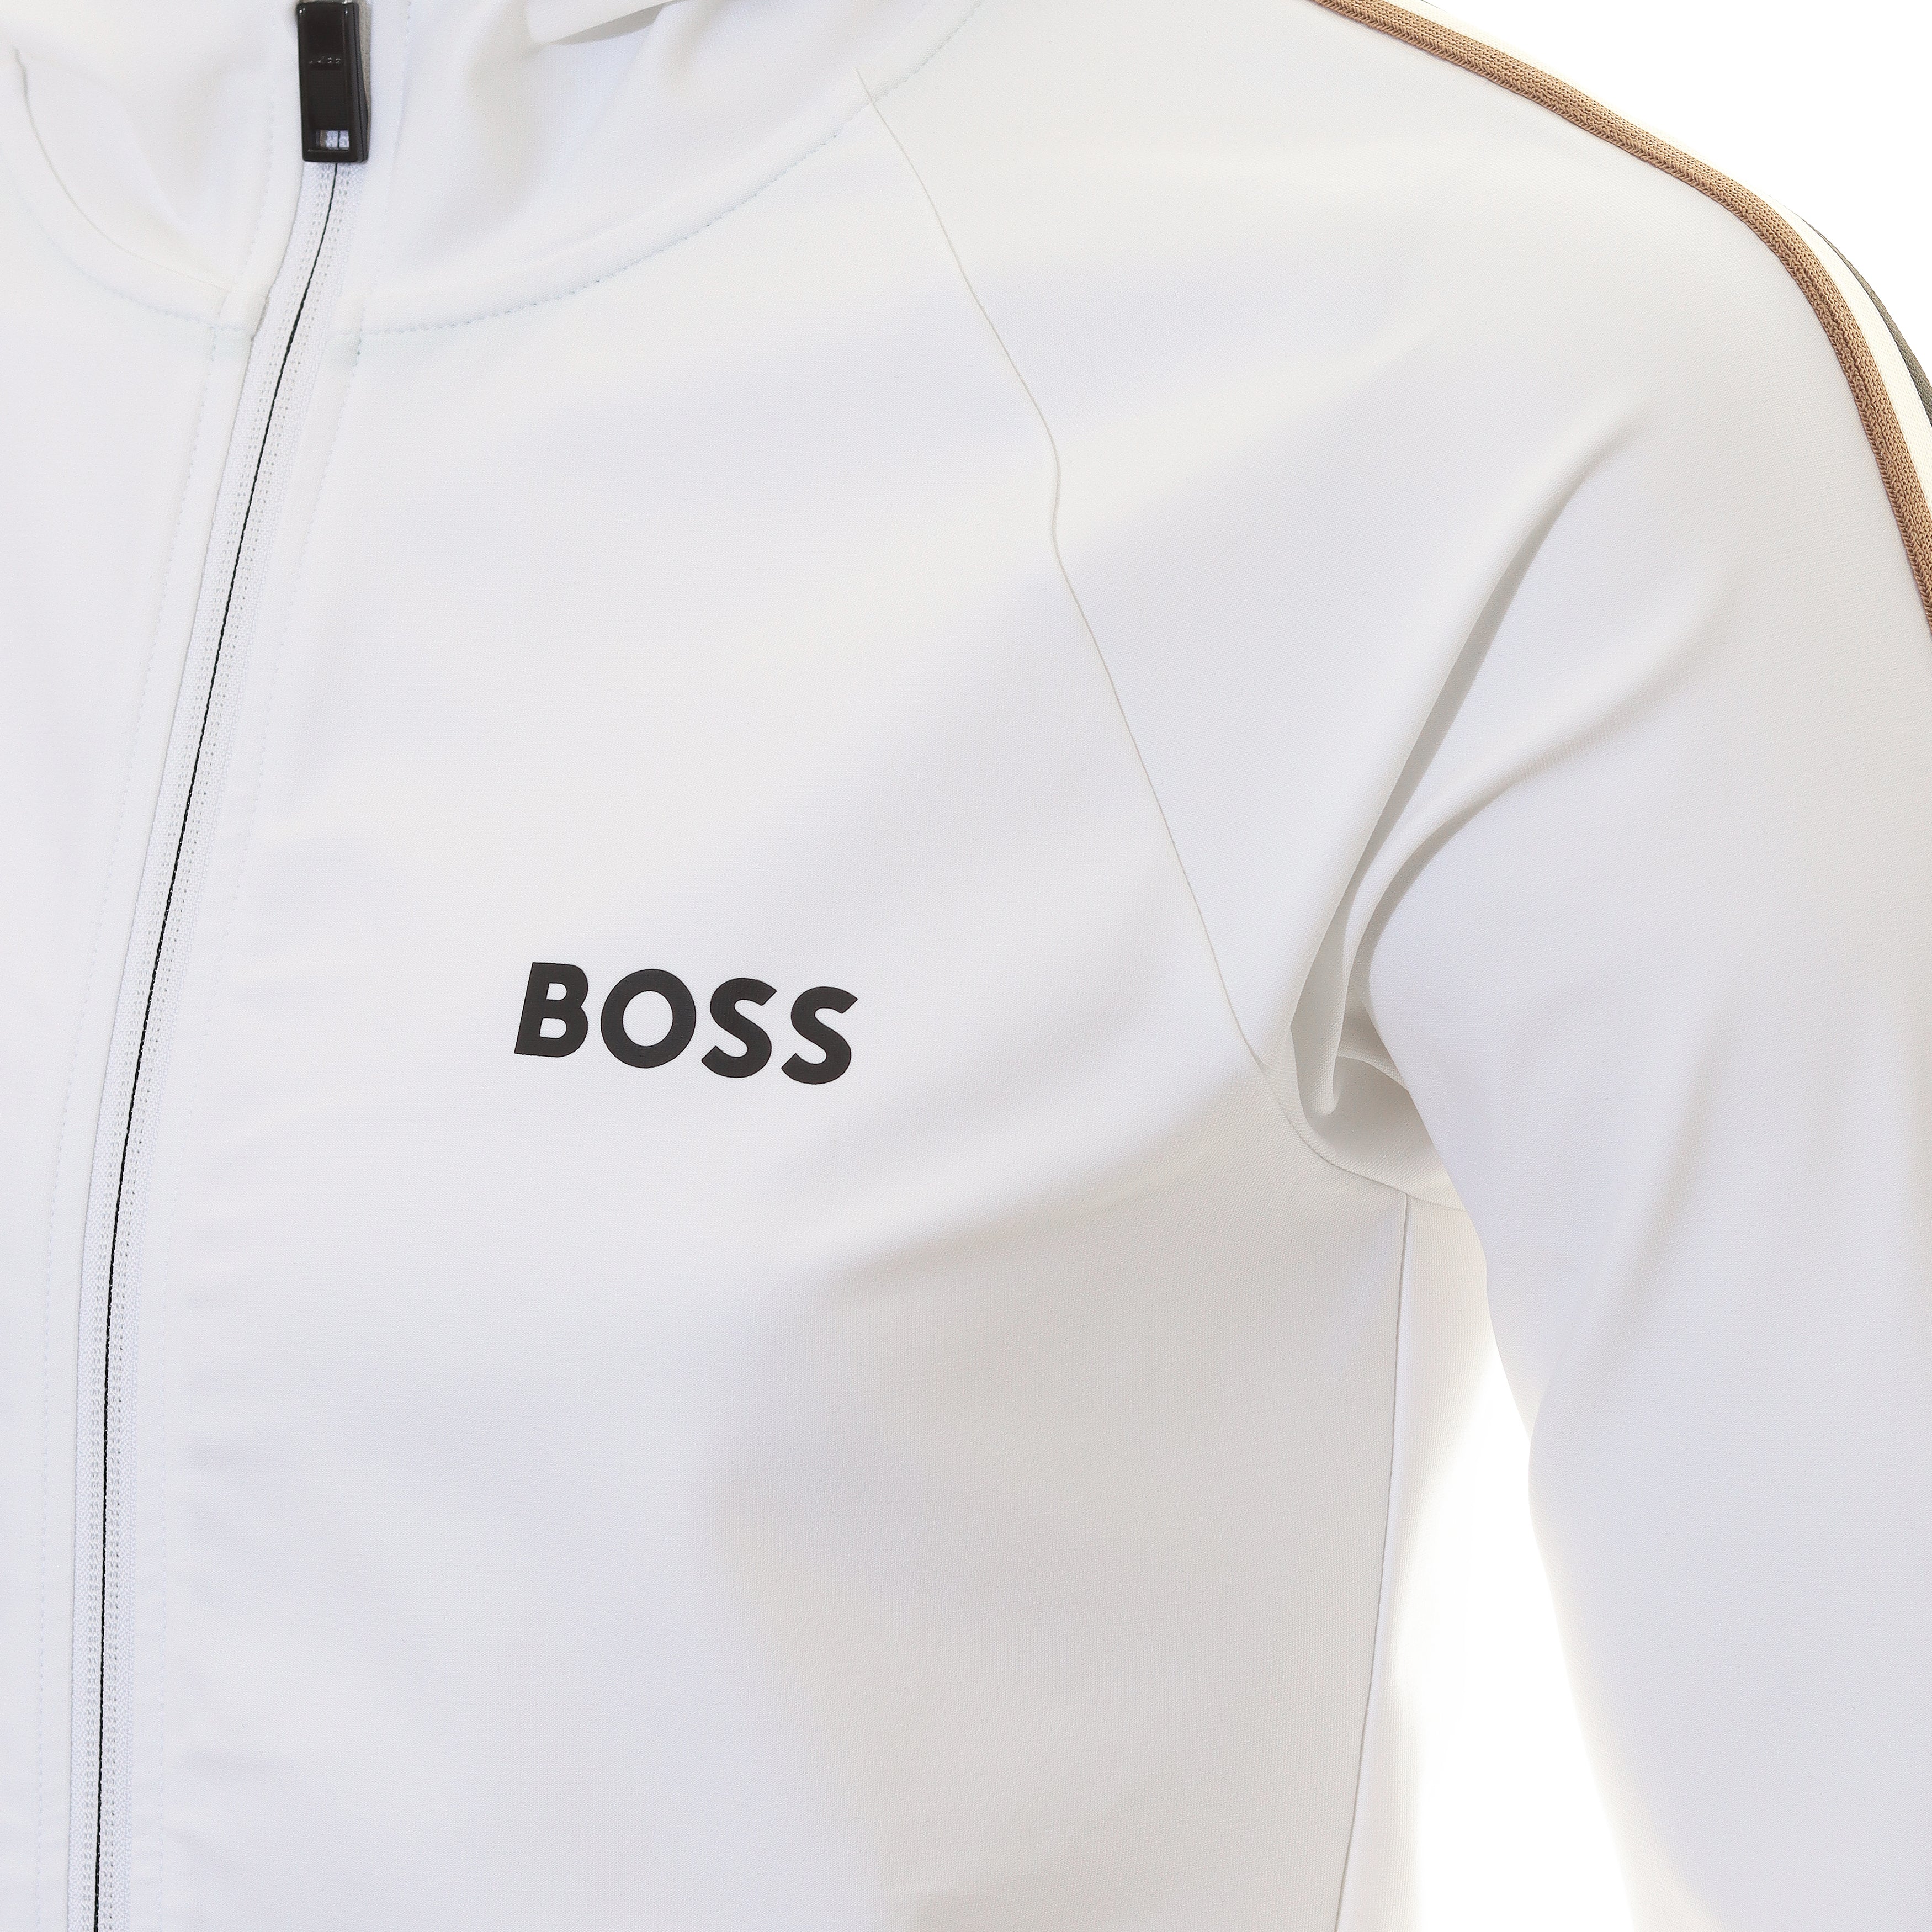 BOSS Sicon MB 1 Full Zip Hooded Mid Layer WI23 50504552 White 100 ...